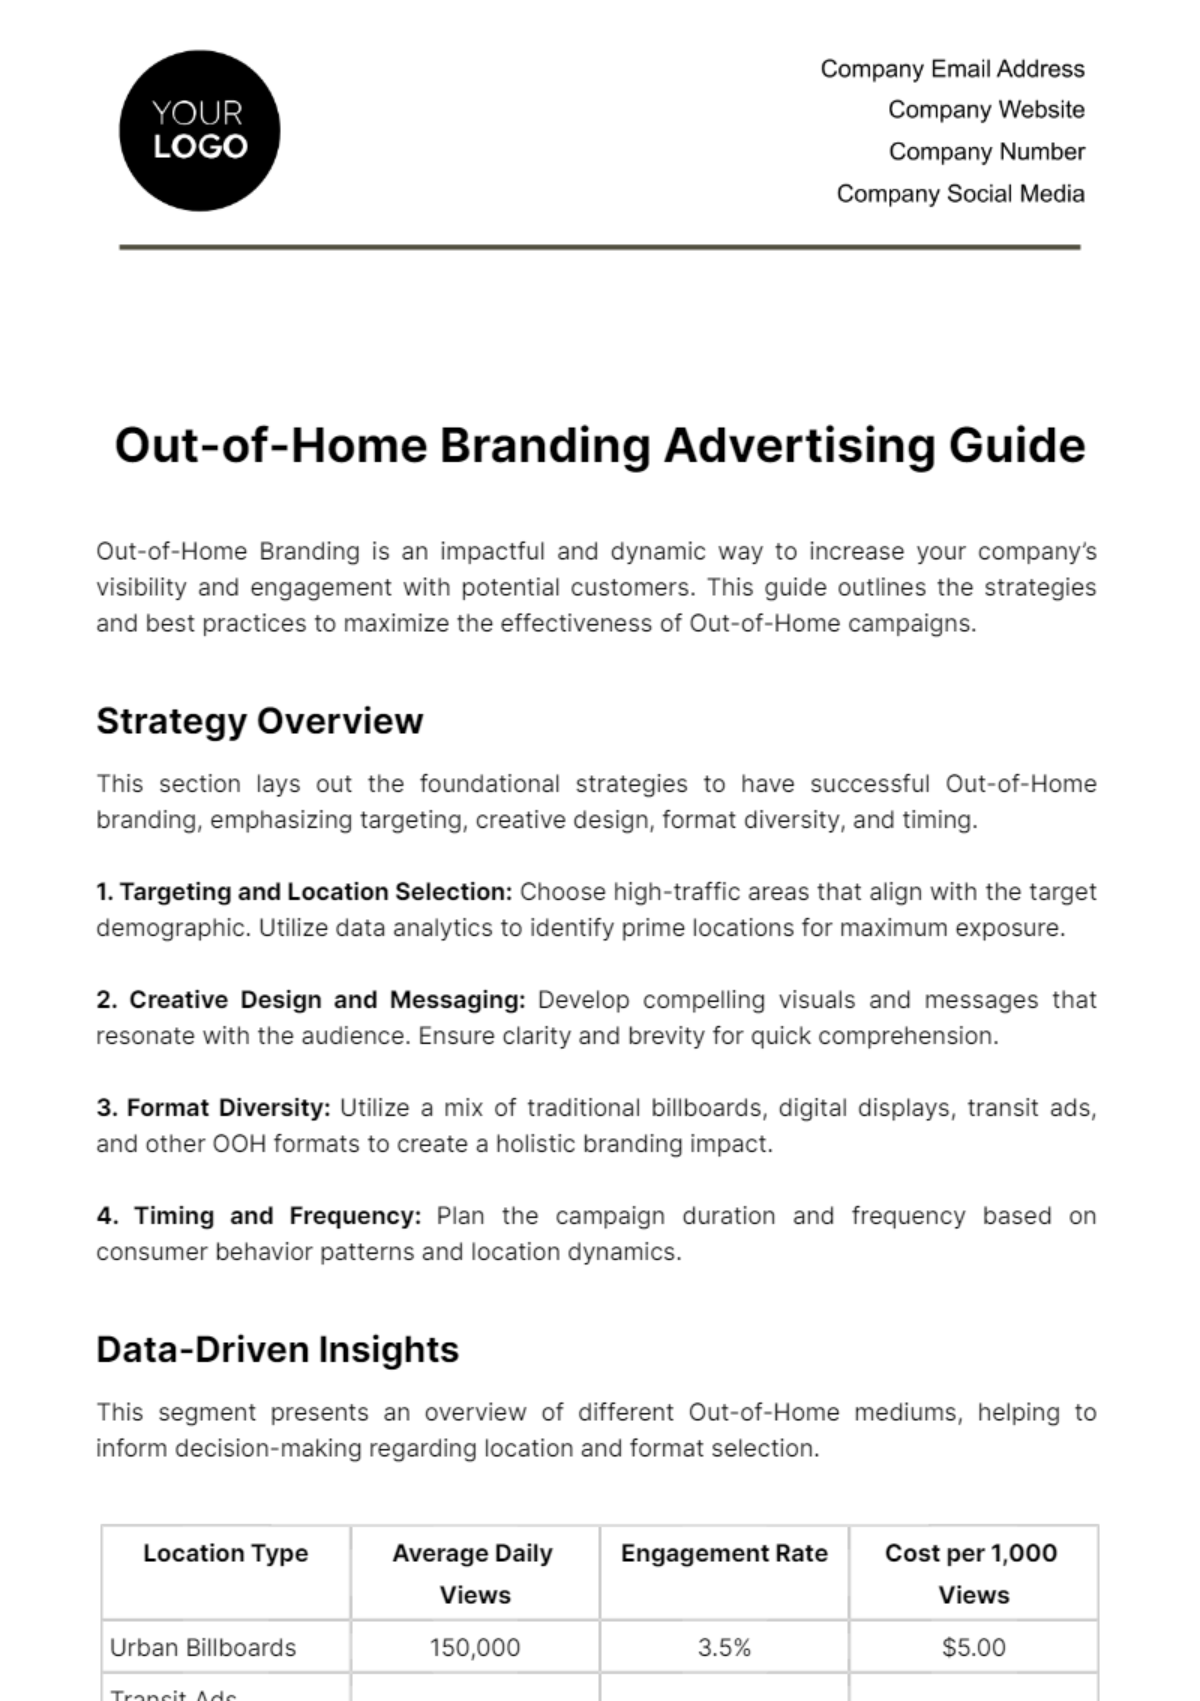 Free Out-of-Home Branding Advertising Guide Template